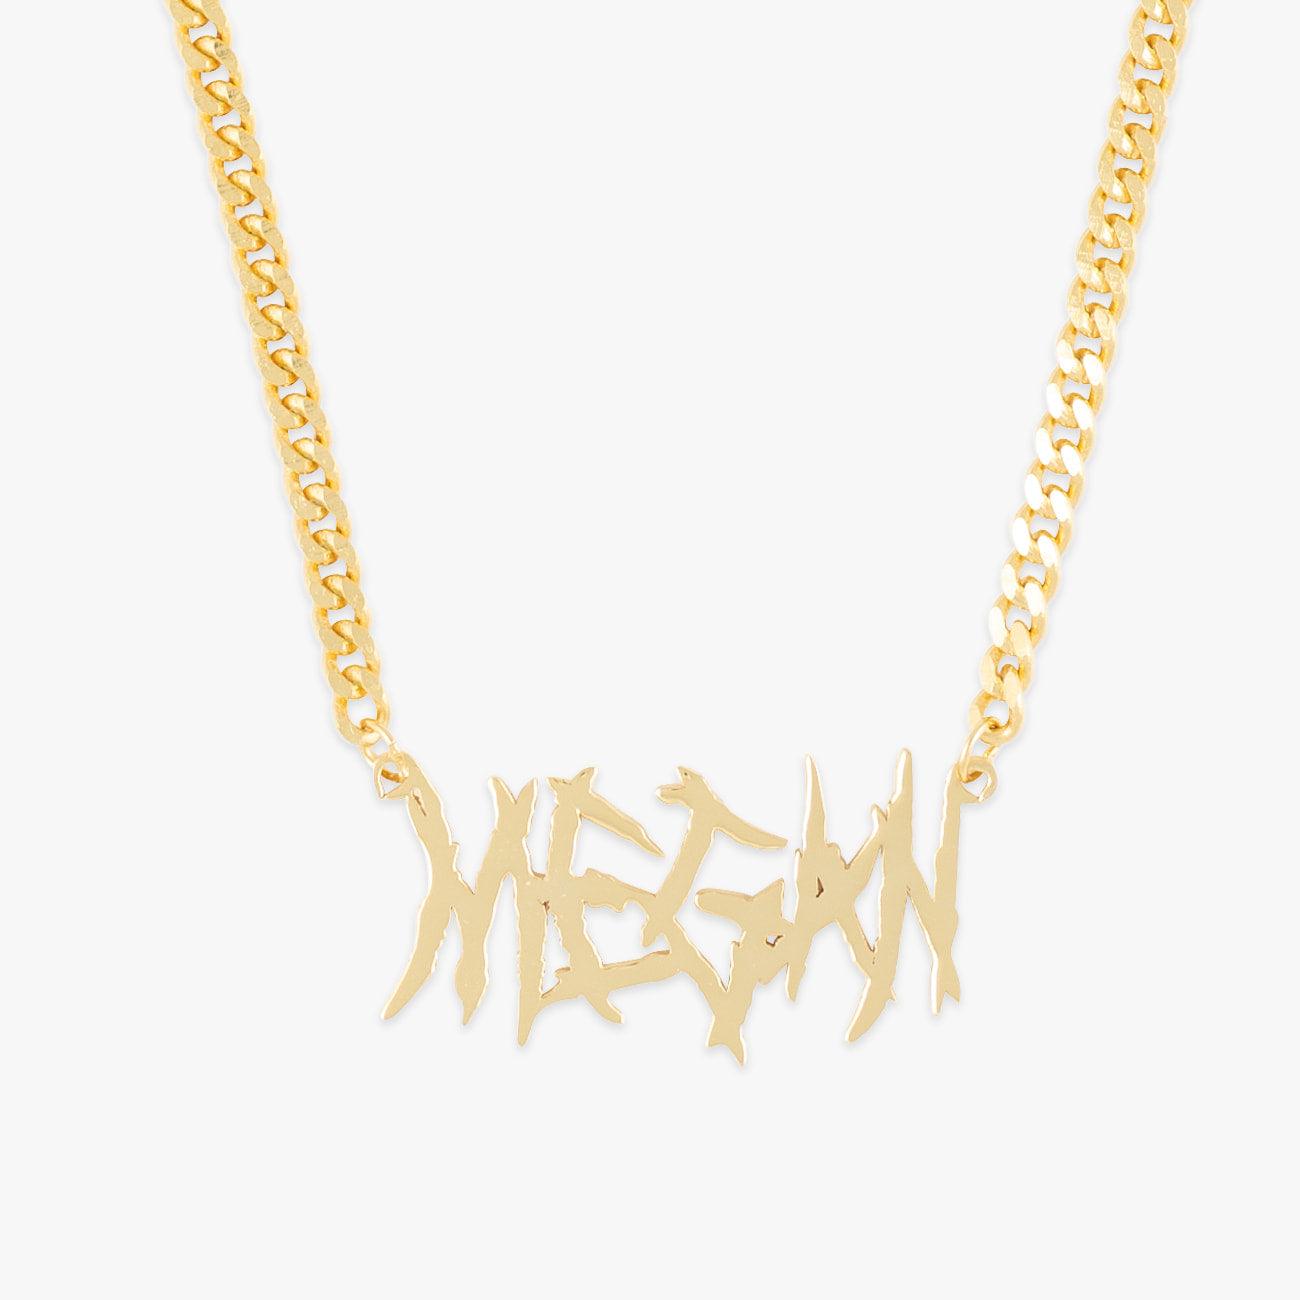 herzschmuck Heavy Metal Name Necklace with Curb Chain